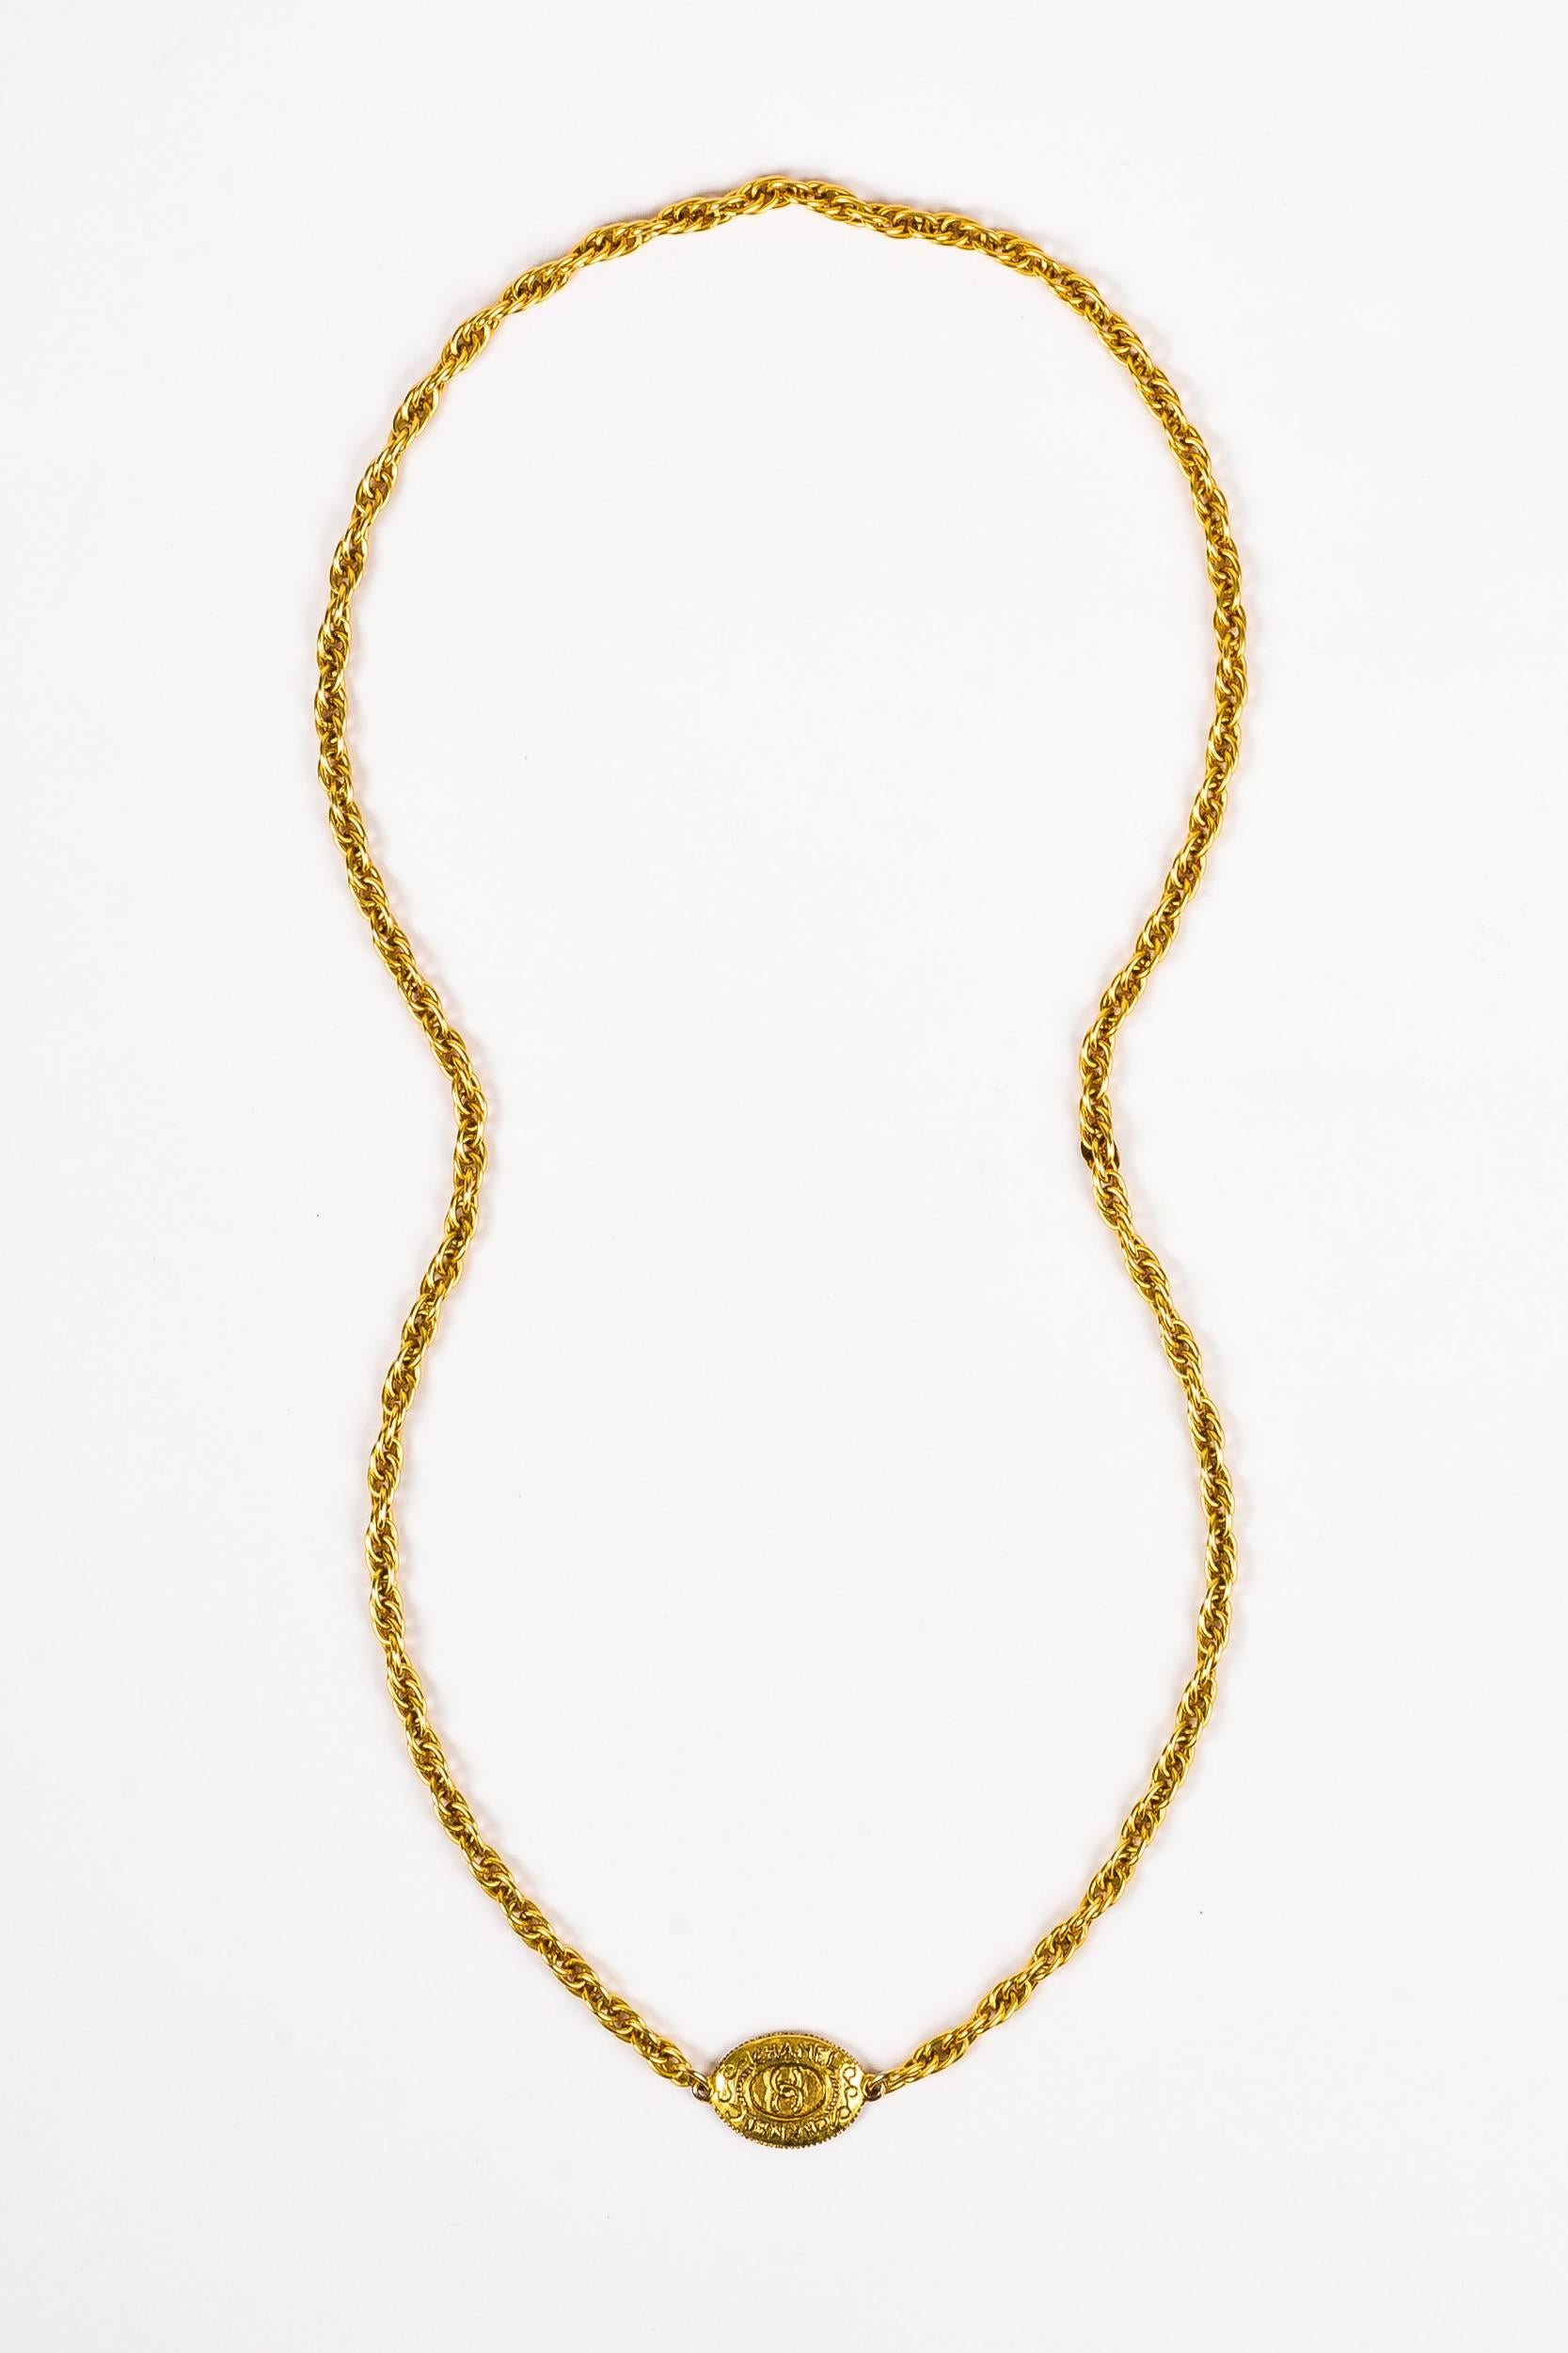 Simple, yet elegant vintage Chanel chain necklace from the 1970's era. May be worn long or layered & short; this timeless piece is a versatile collector's item. Gold-tone metal. Double chain links. Oval pendant with iconic 'CC' logo. Necklace is